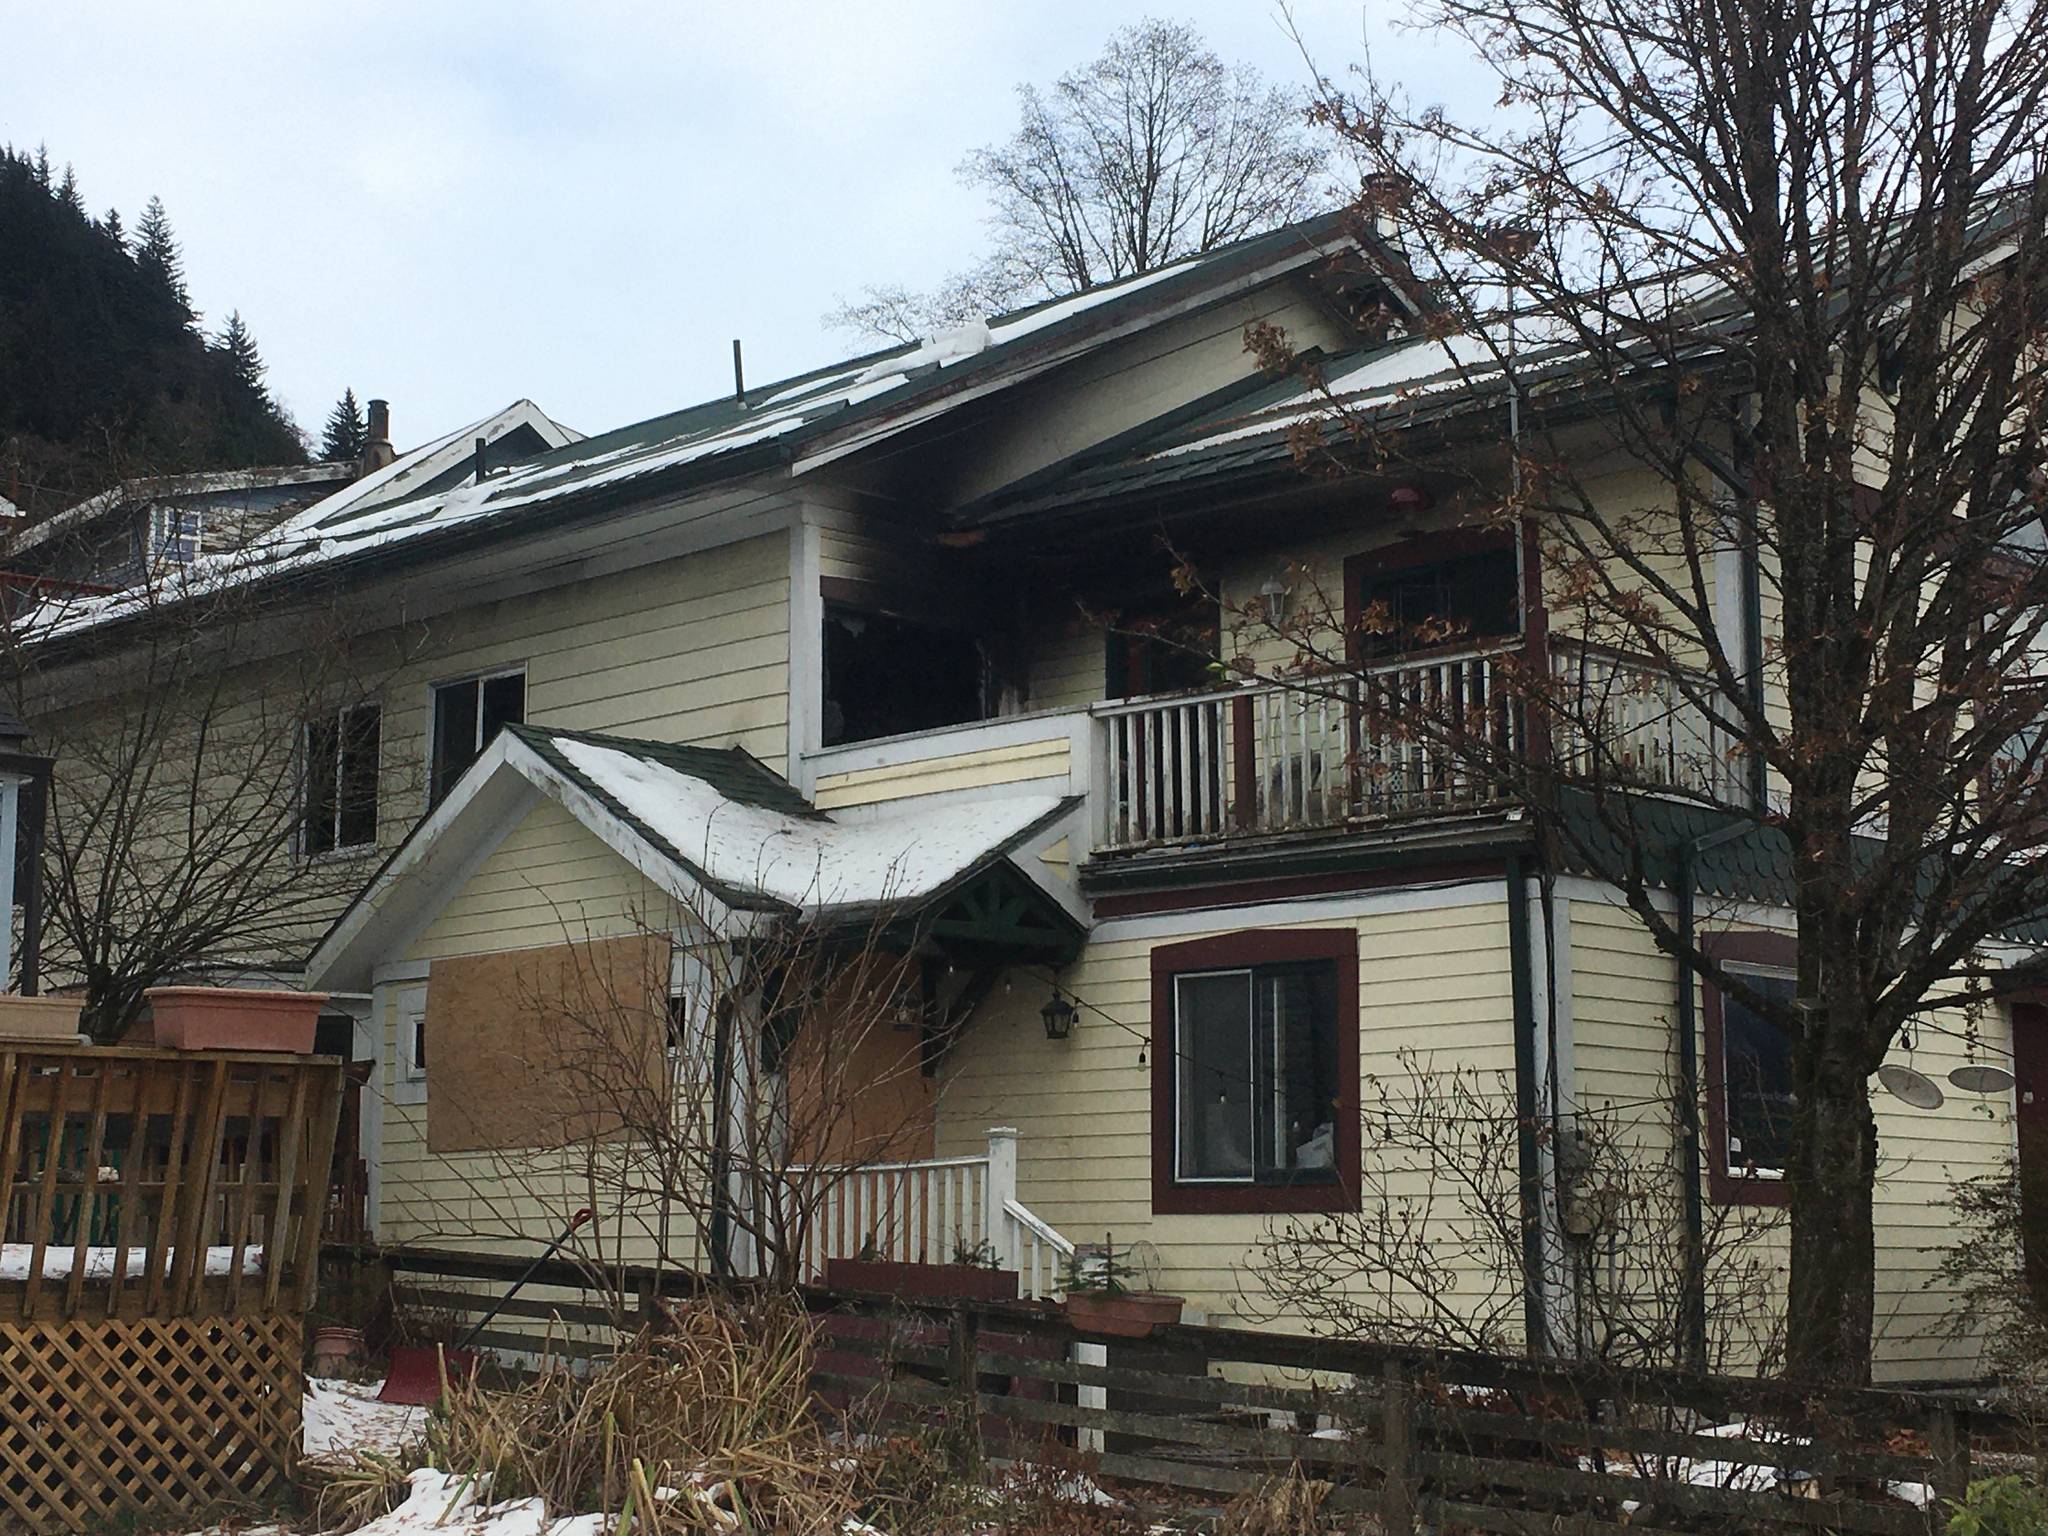 Charring and other damage is visible on a downtown residence burned in a fire early Sunday morning, Nov. 15, 2020. No one was injured, but Capital City Fire/Rescue assessed the damage at roughly $100,000. (Michael S. Lockett / Juneau Empire)